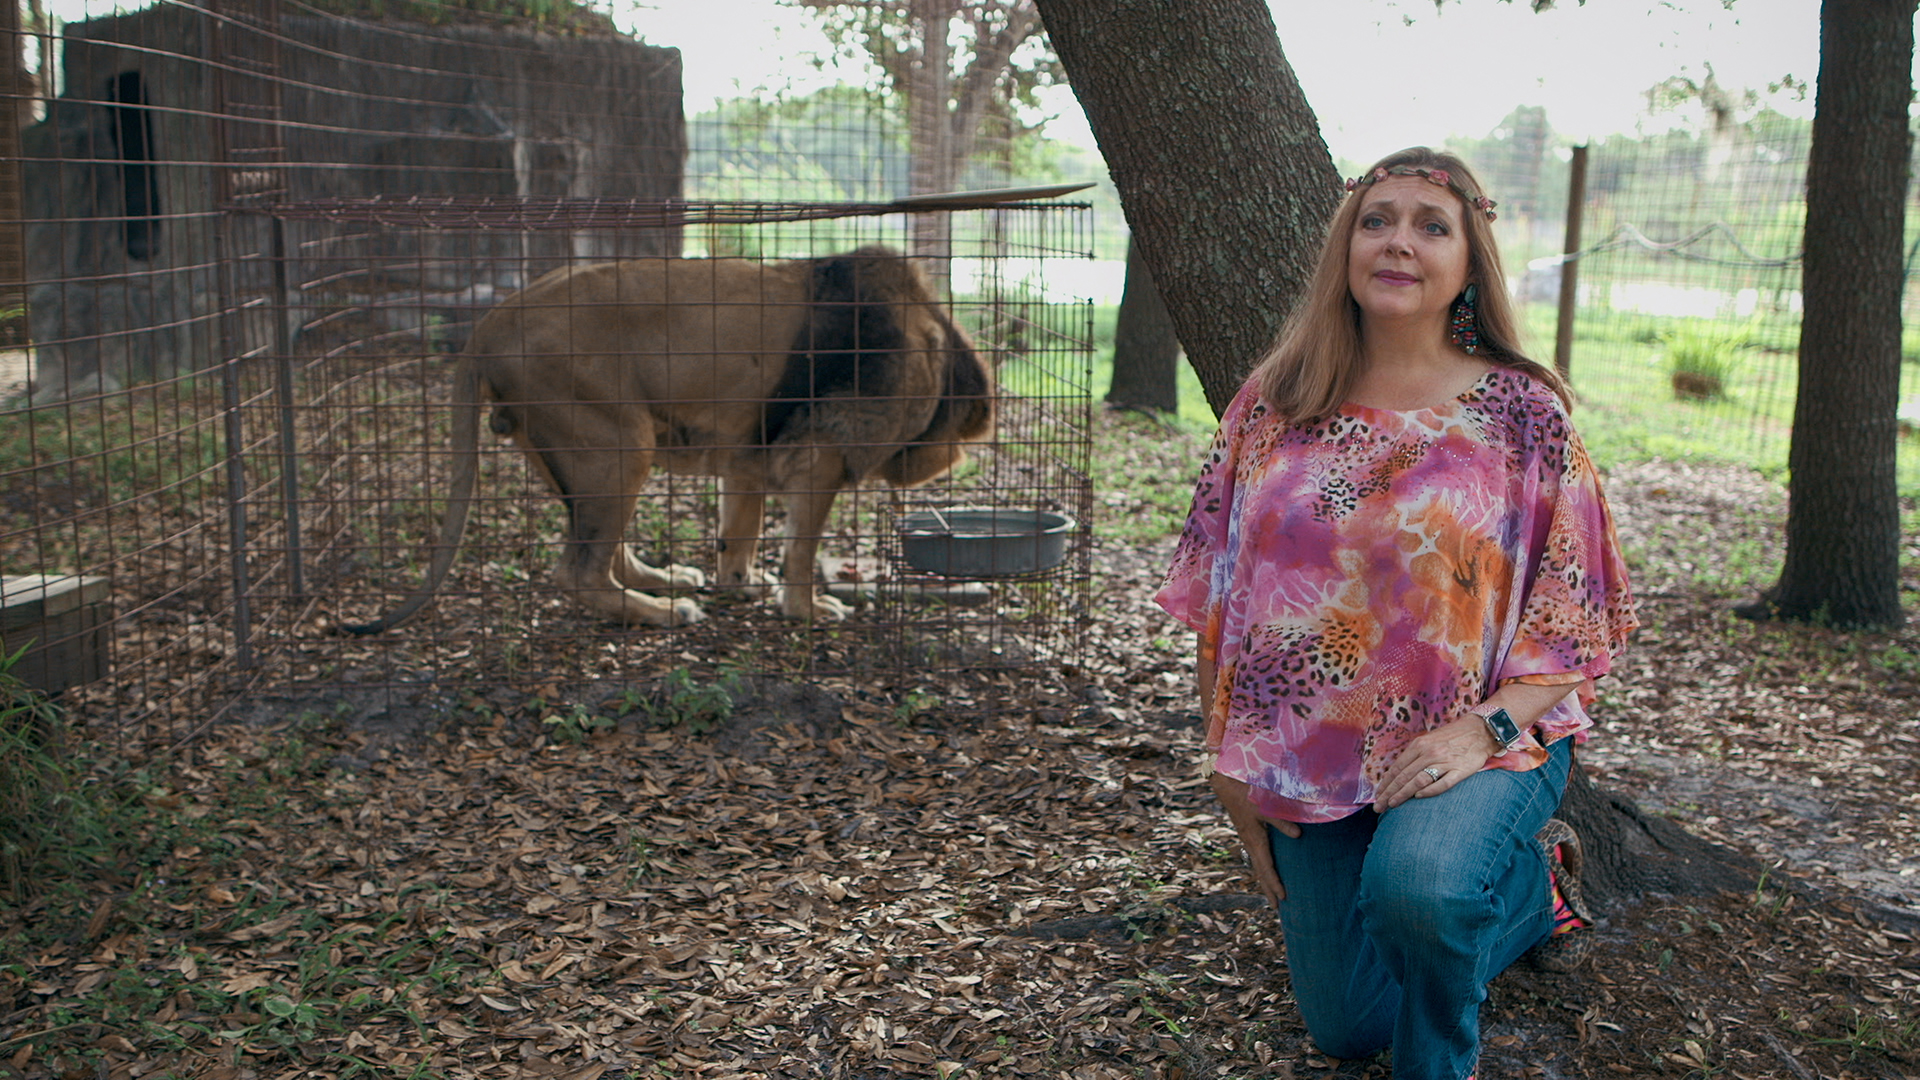 Carole Baskin poses by a lion in an enclosure at Big Cat Rescue.